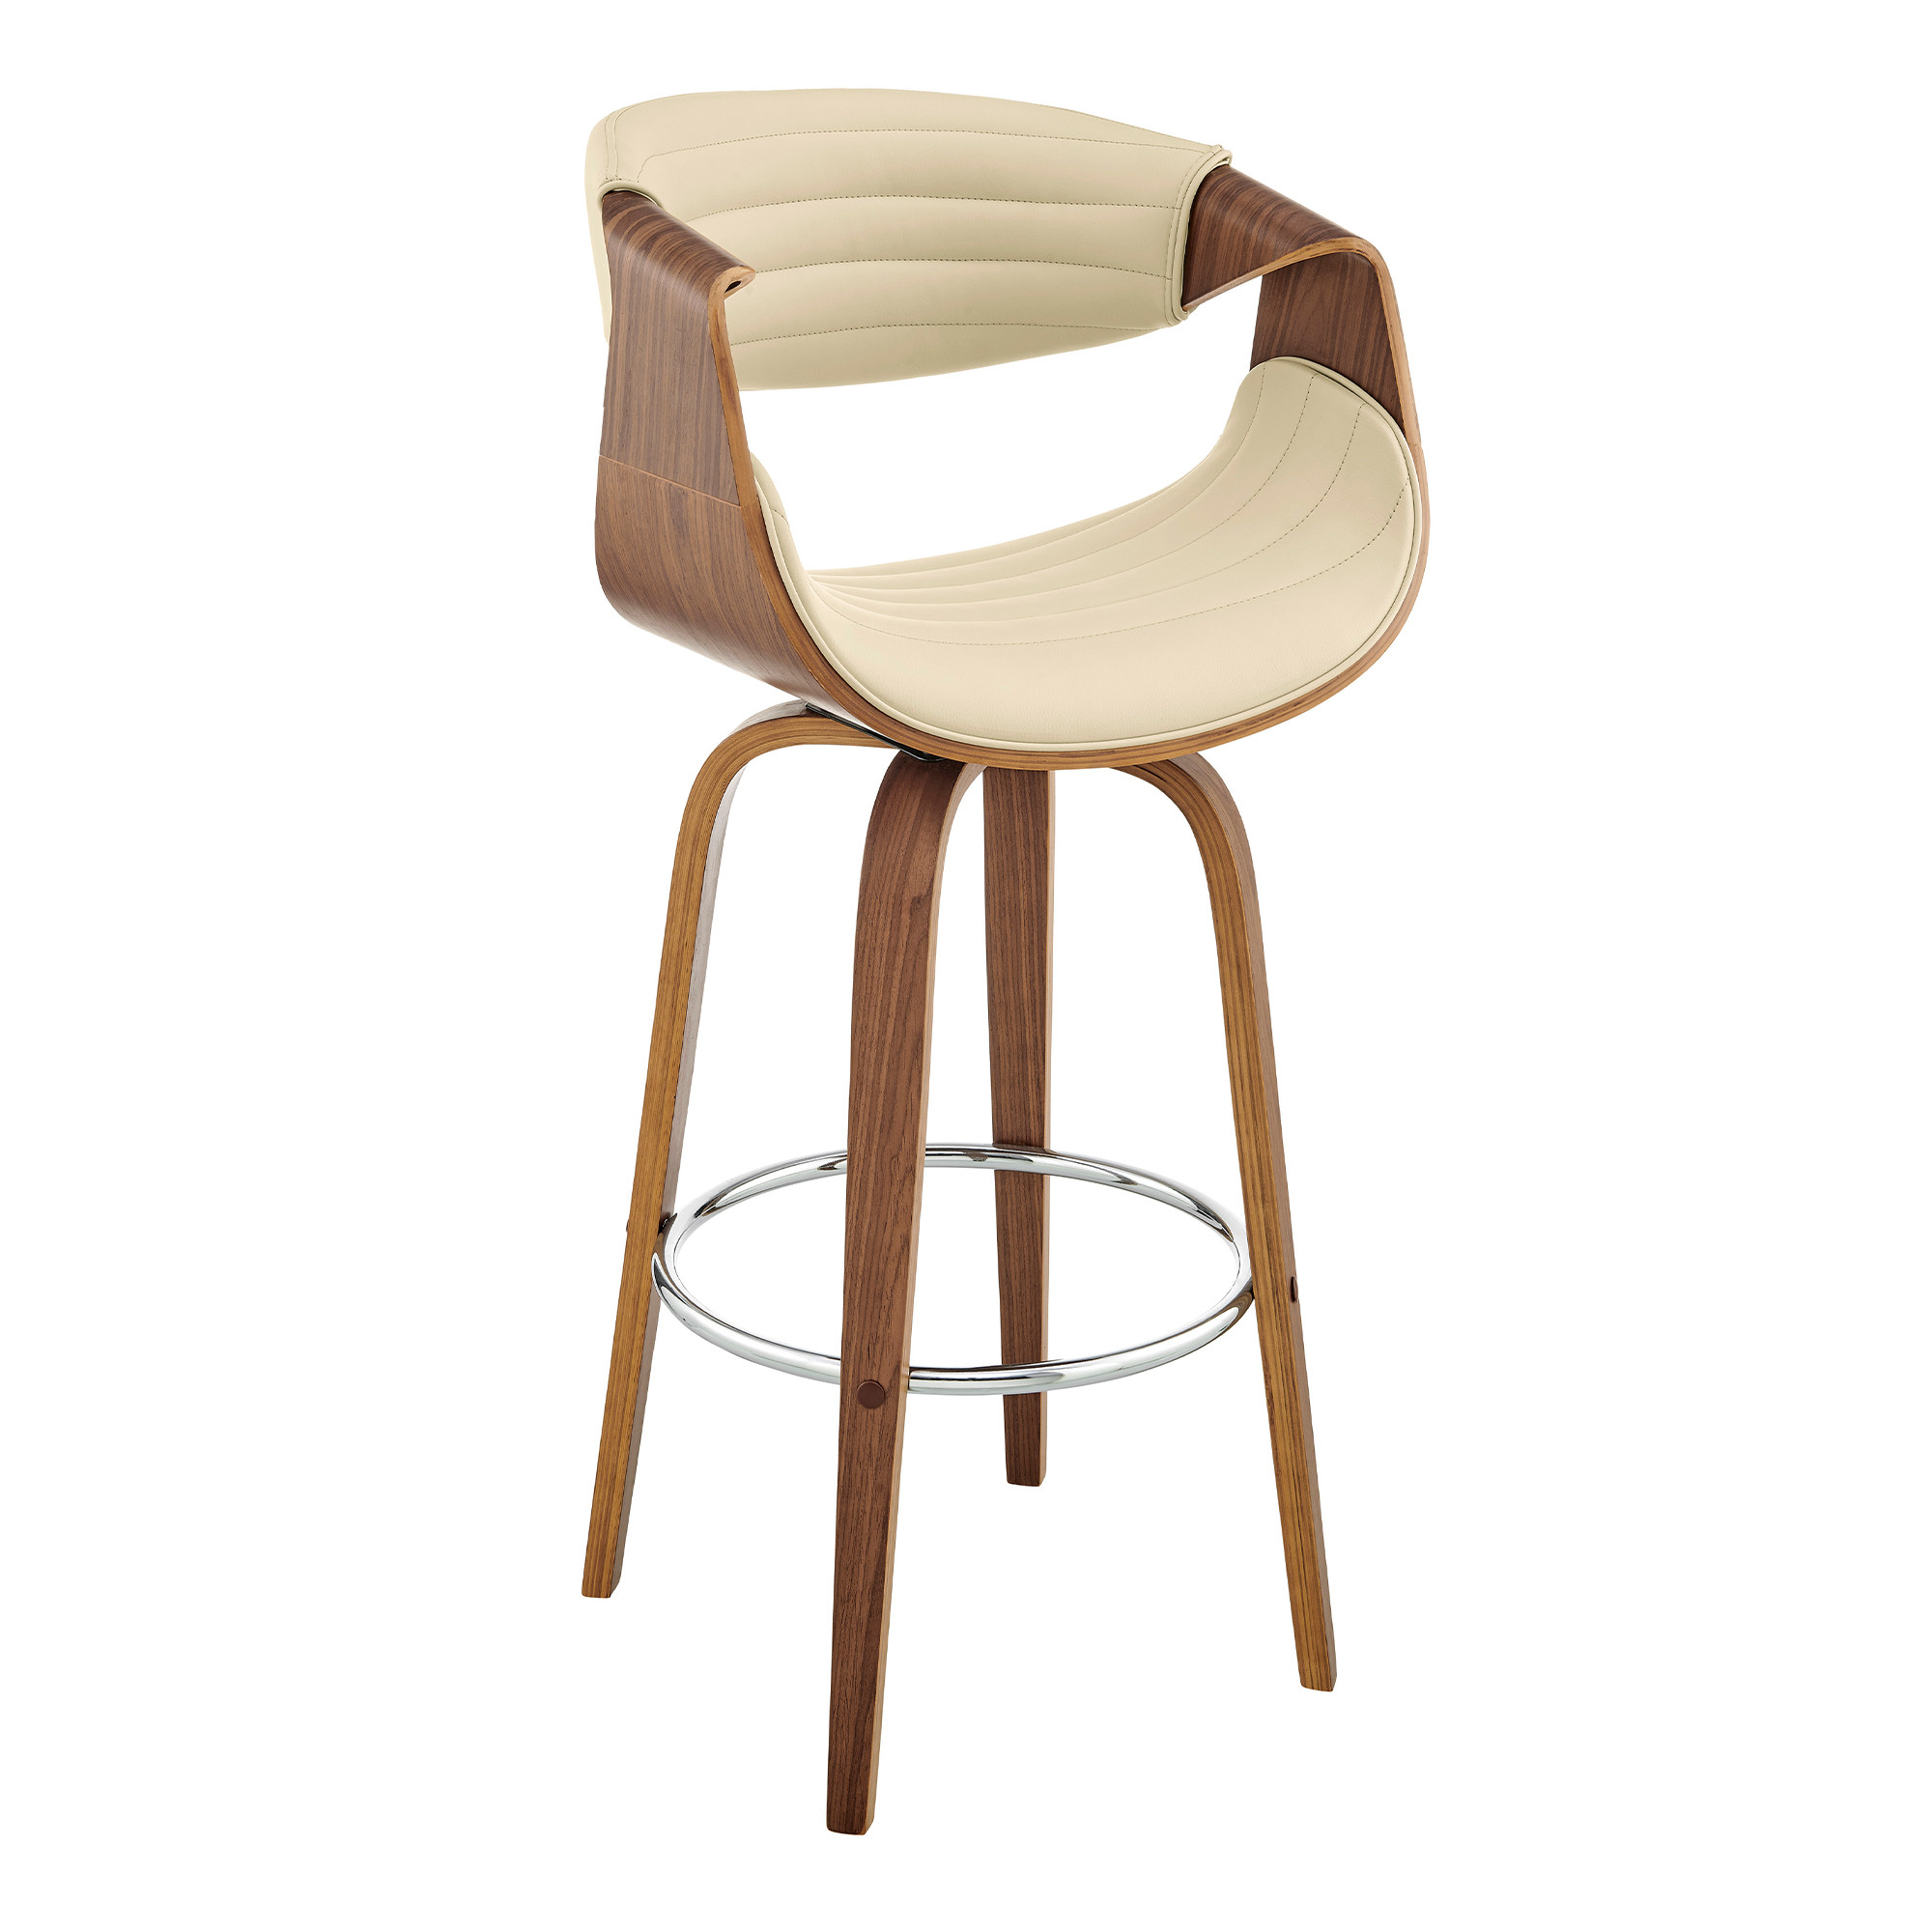 26" Cream Faux Leather and Walnut Wood Retro Chic Swivel Counter Stool